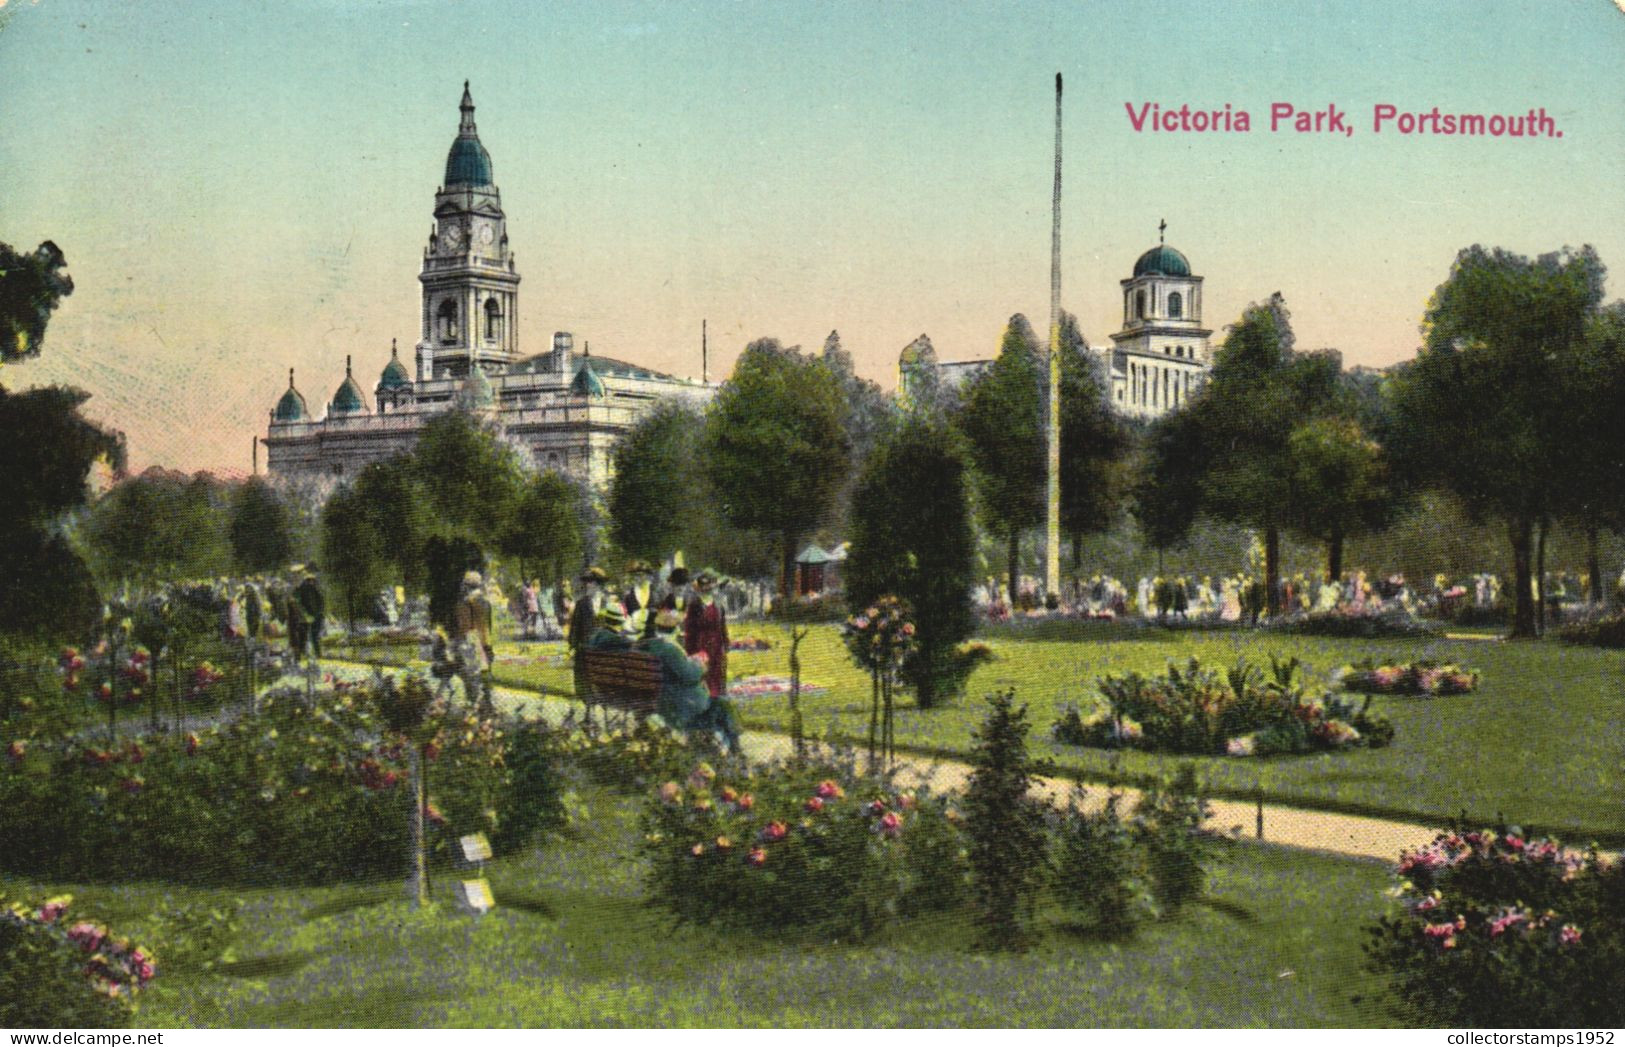 PORTSMOUTH, HAMPSHIRE, VICTORIA PARK, ARCHITECTURE, TOWER WITH CLOCK, ENGLAND, UNITED KINGDOM, POSTCARD - Portsmouth